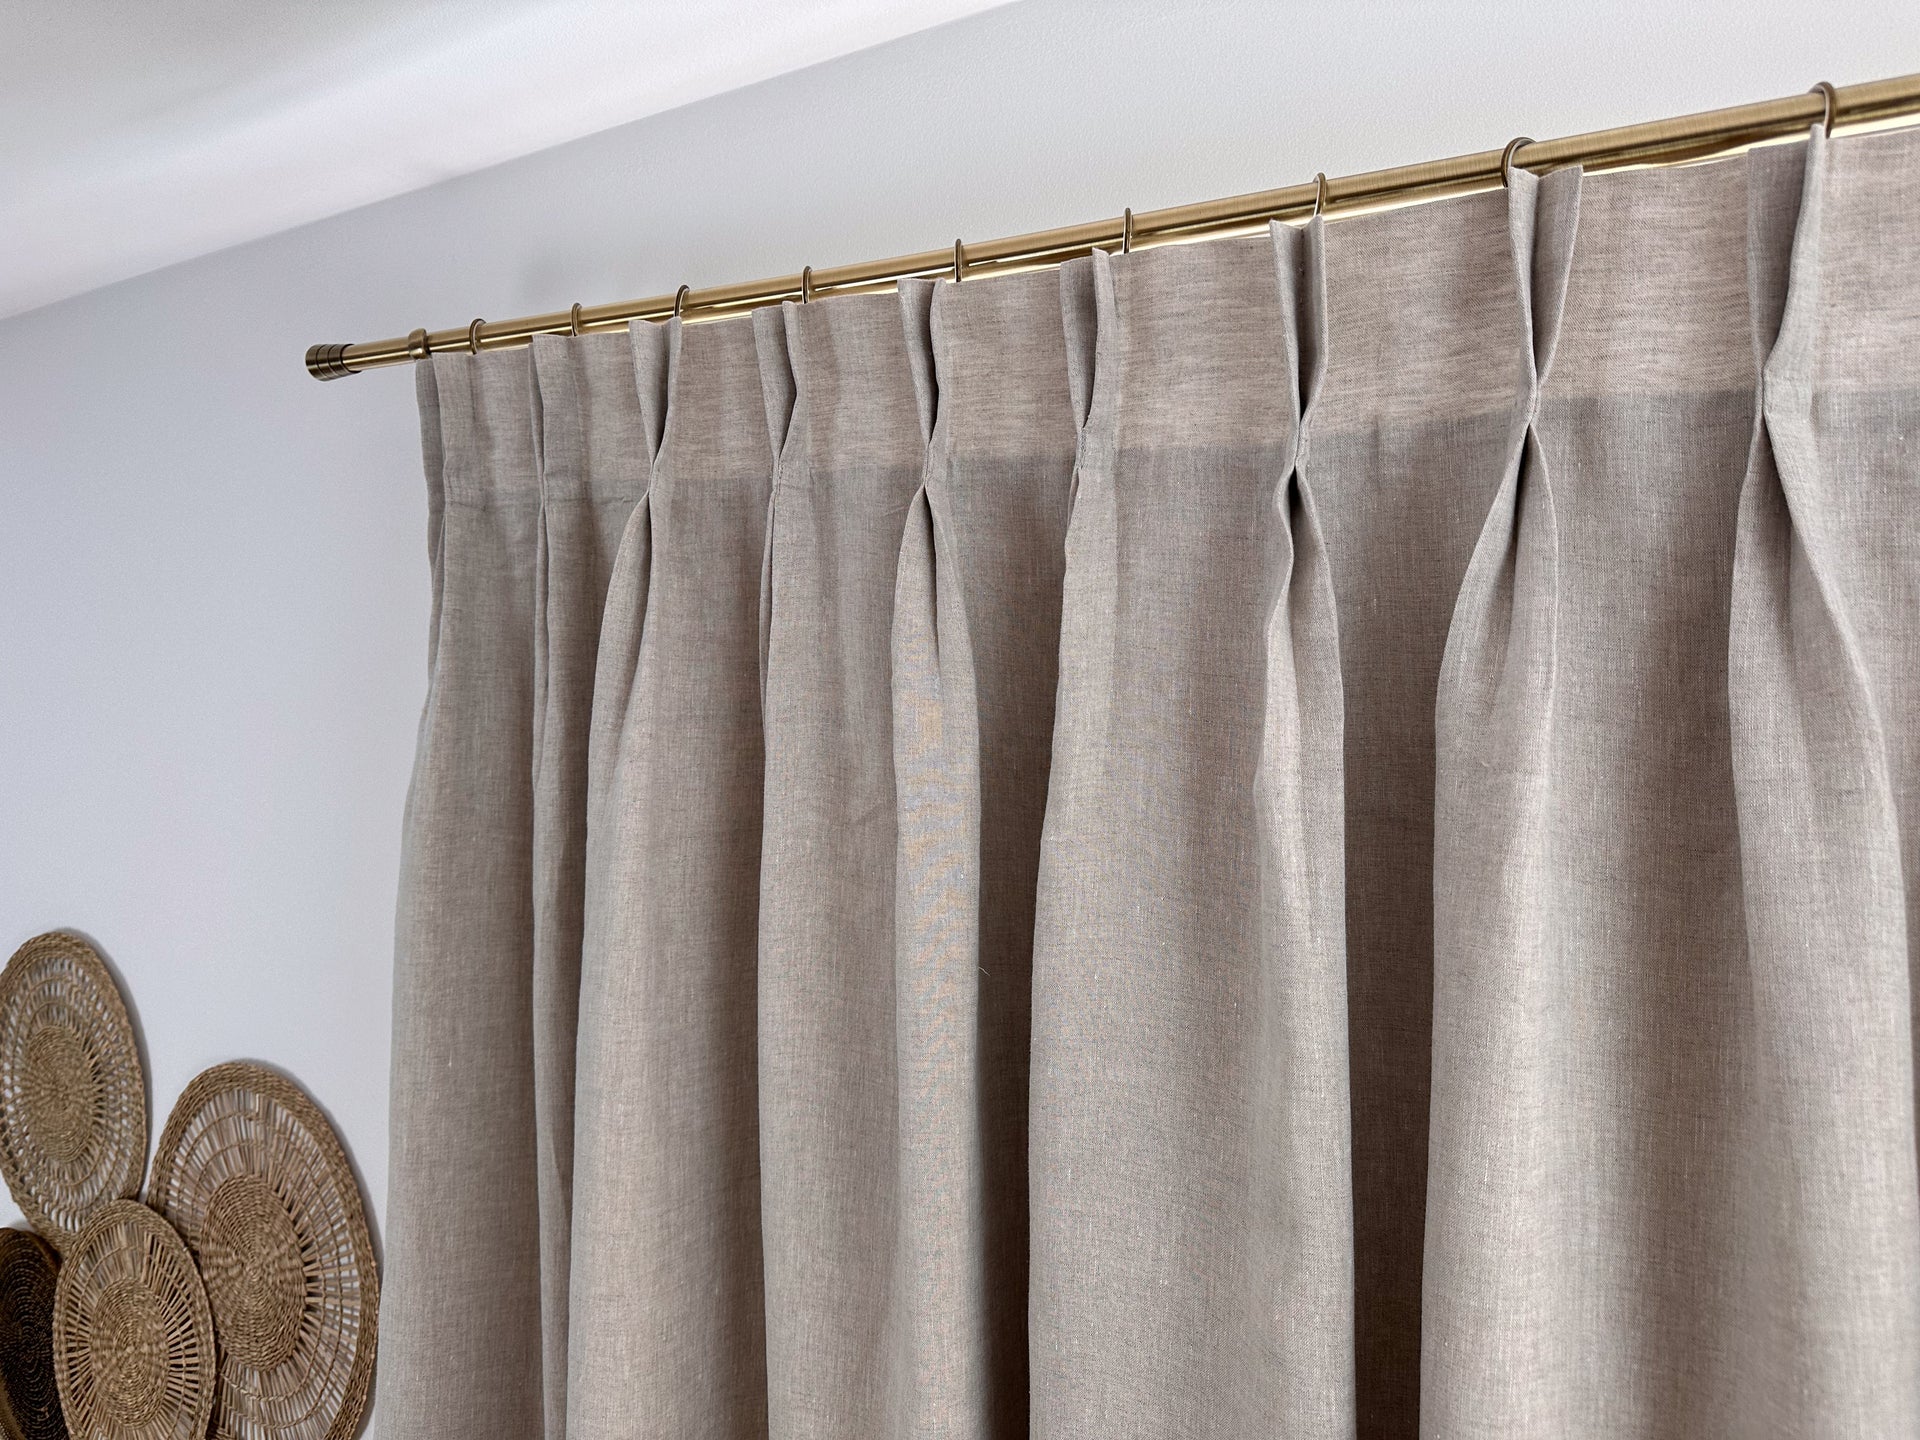 Double Pinch Pleat Linen Curtain with Cotton Lining - Heading for Ring